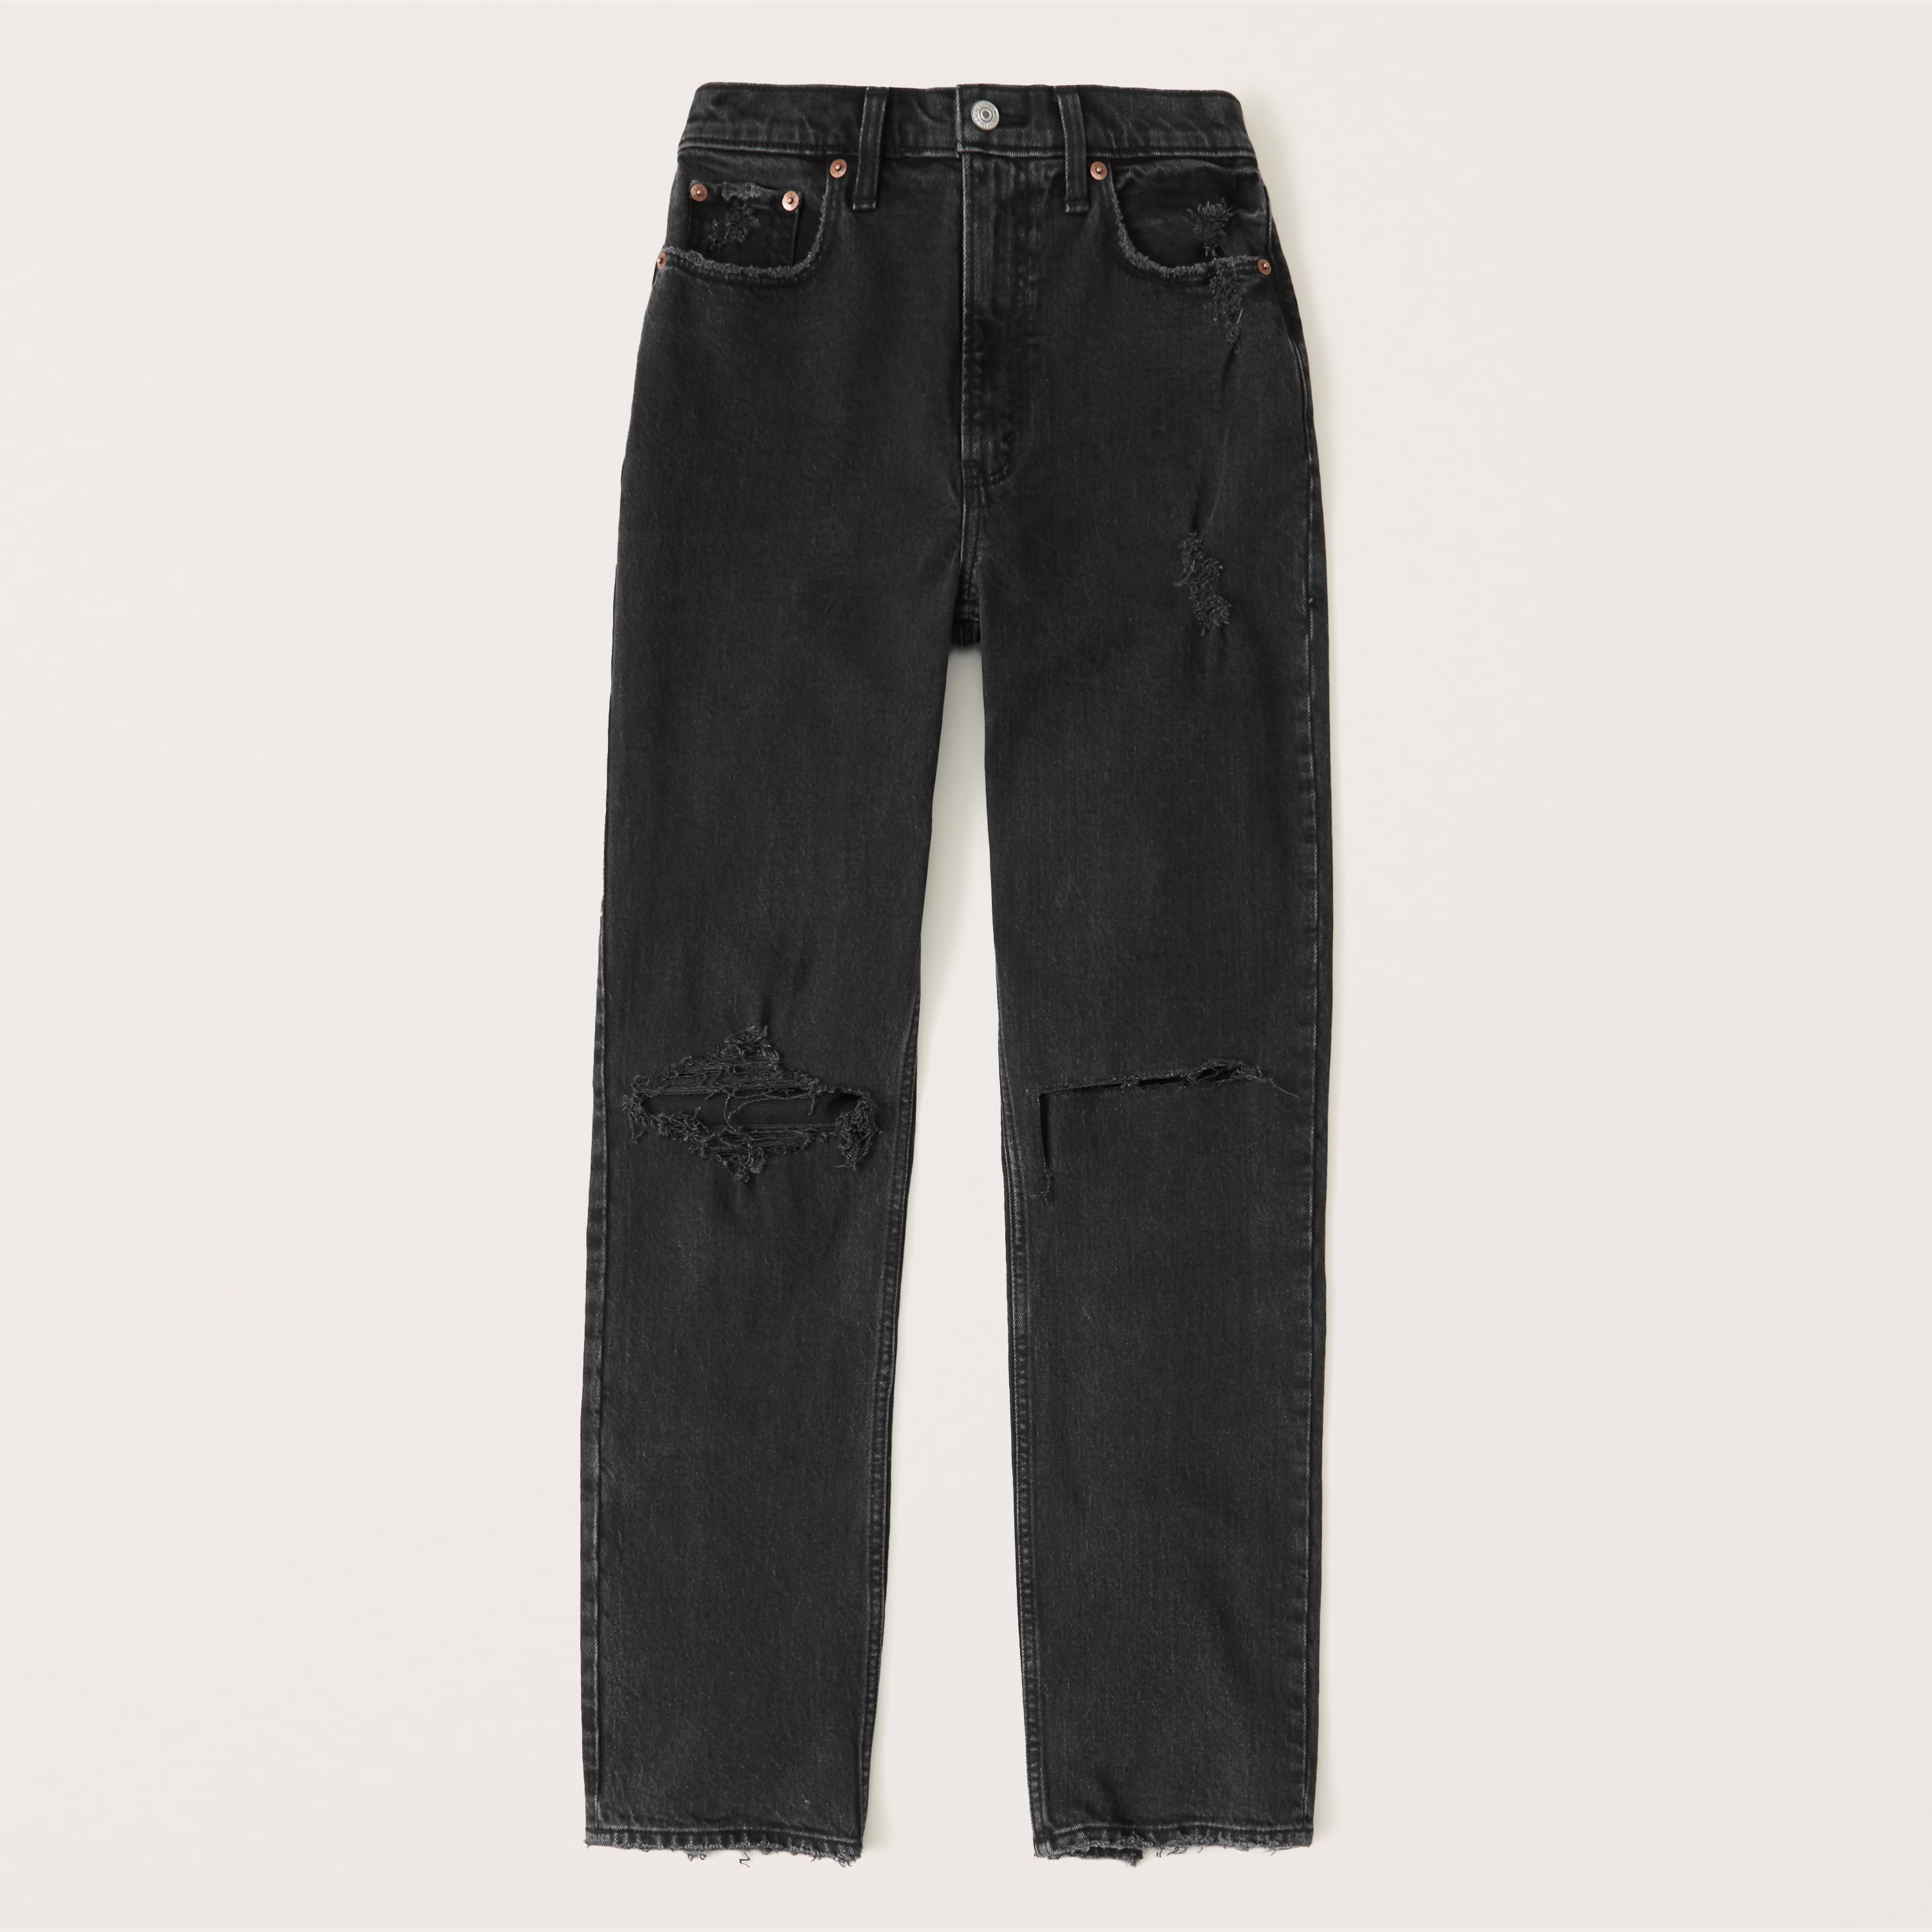 Signature by Levi Strauss & Co. Gold Label Men's Bootcut Jeans (Available  in Big & Tall)